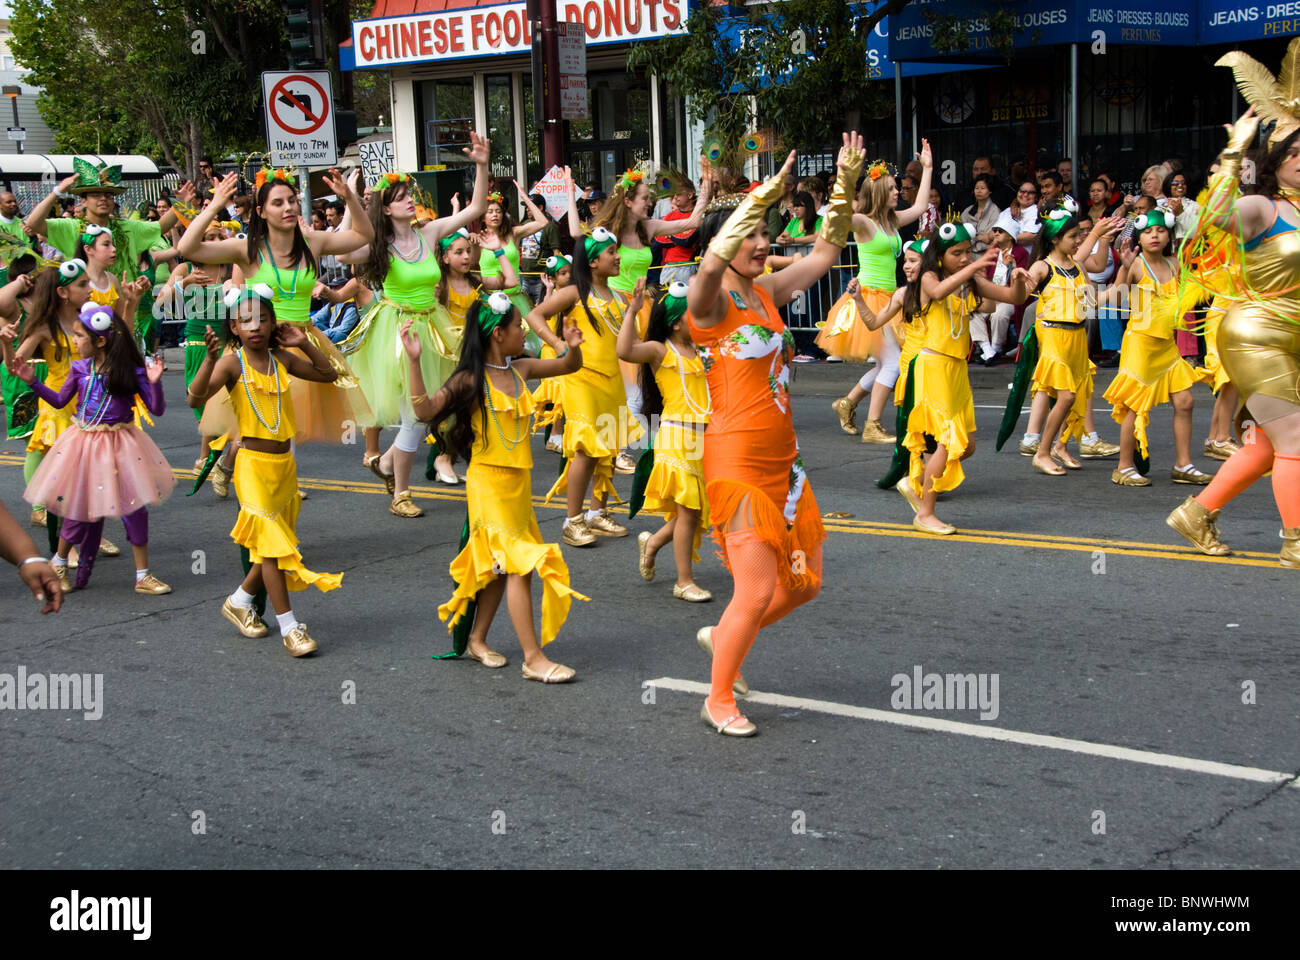 California: San Francisco Carnaval festival parade in the Mission District. Photo copyright Lee Foster. Photo # 30-casanf81311 Stock Photo